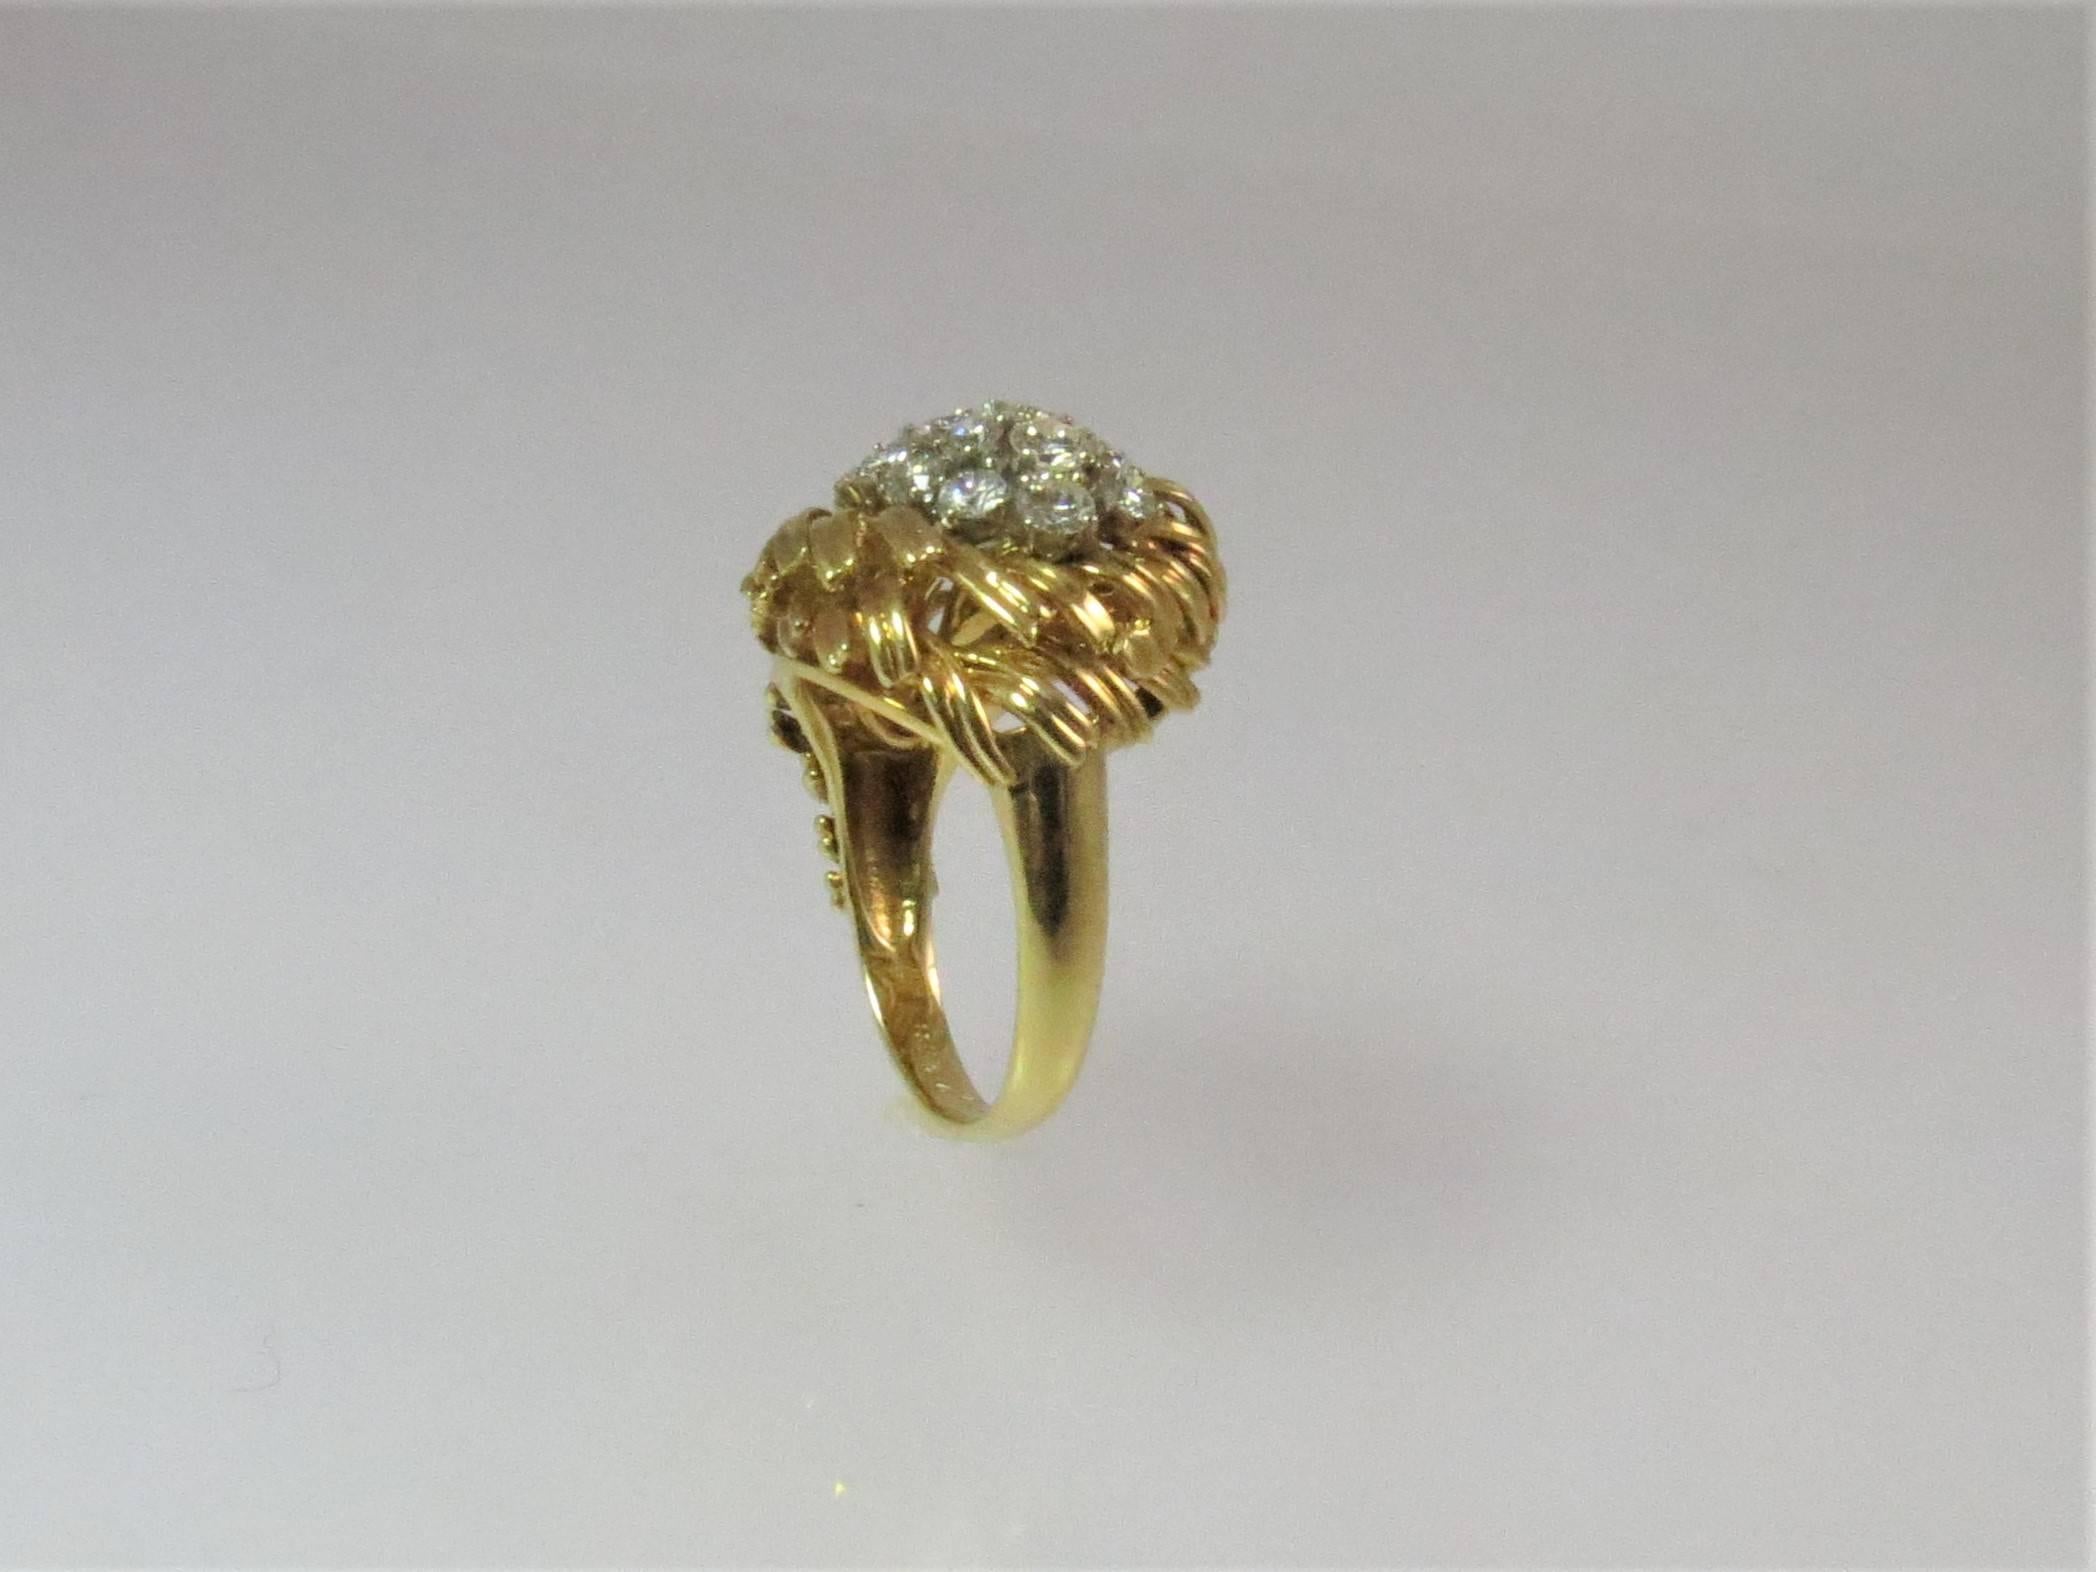 18K yellow gold diamond cluster ring, set with 21 full cut round diamonds weighing 1.03cts, F-G color, VS clarity 
Finger size 6.5, may be sized